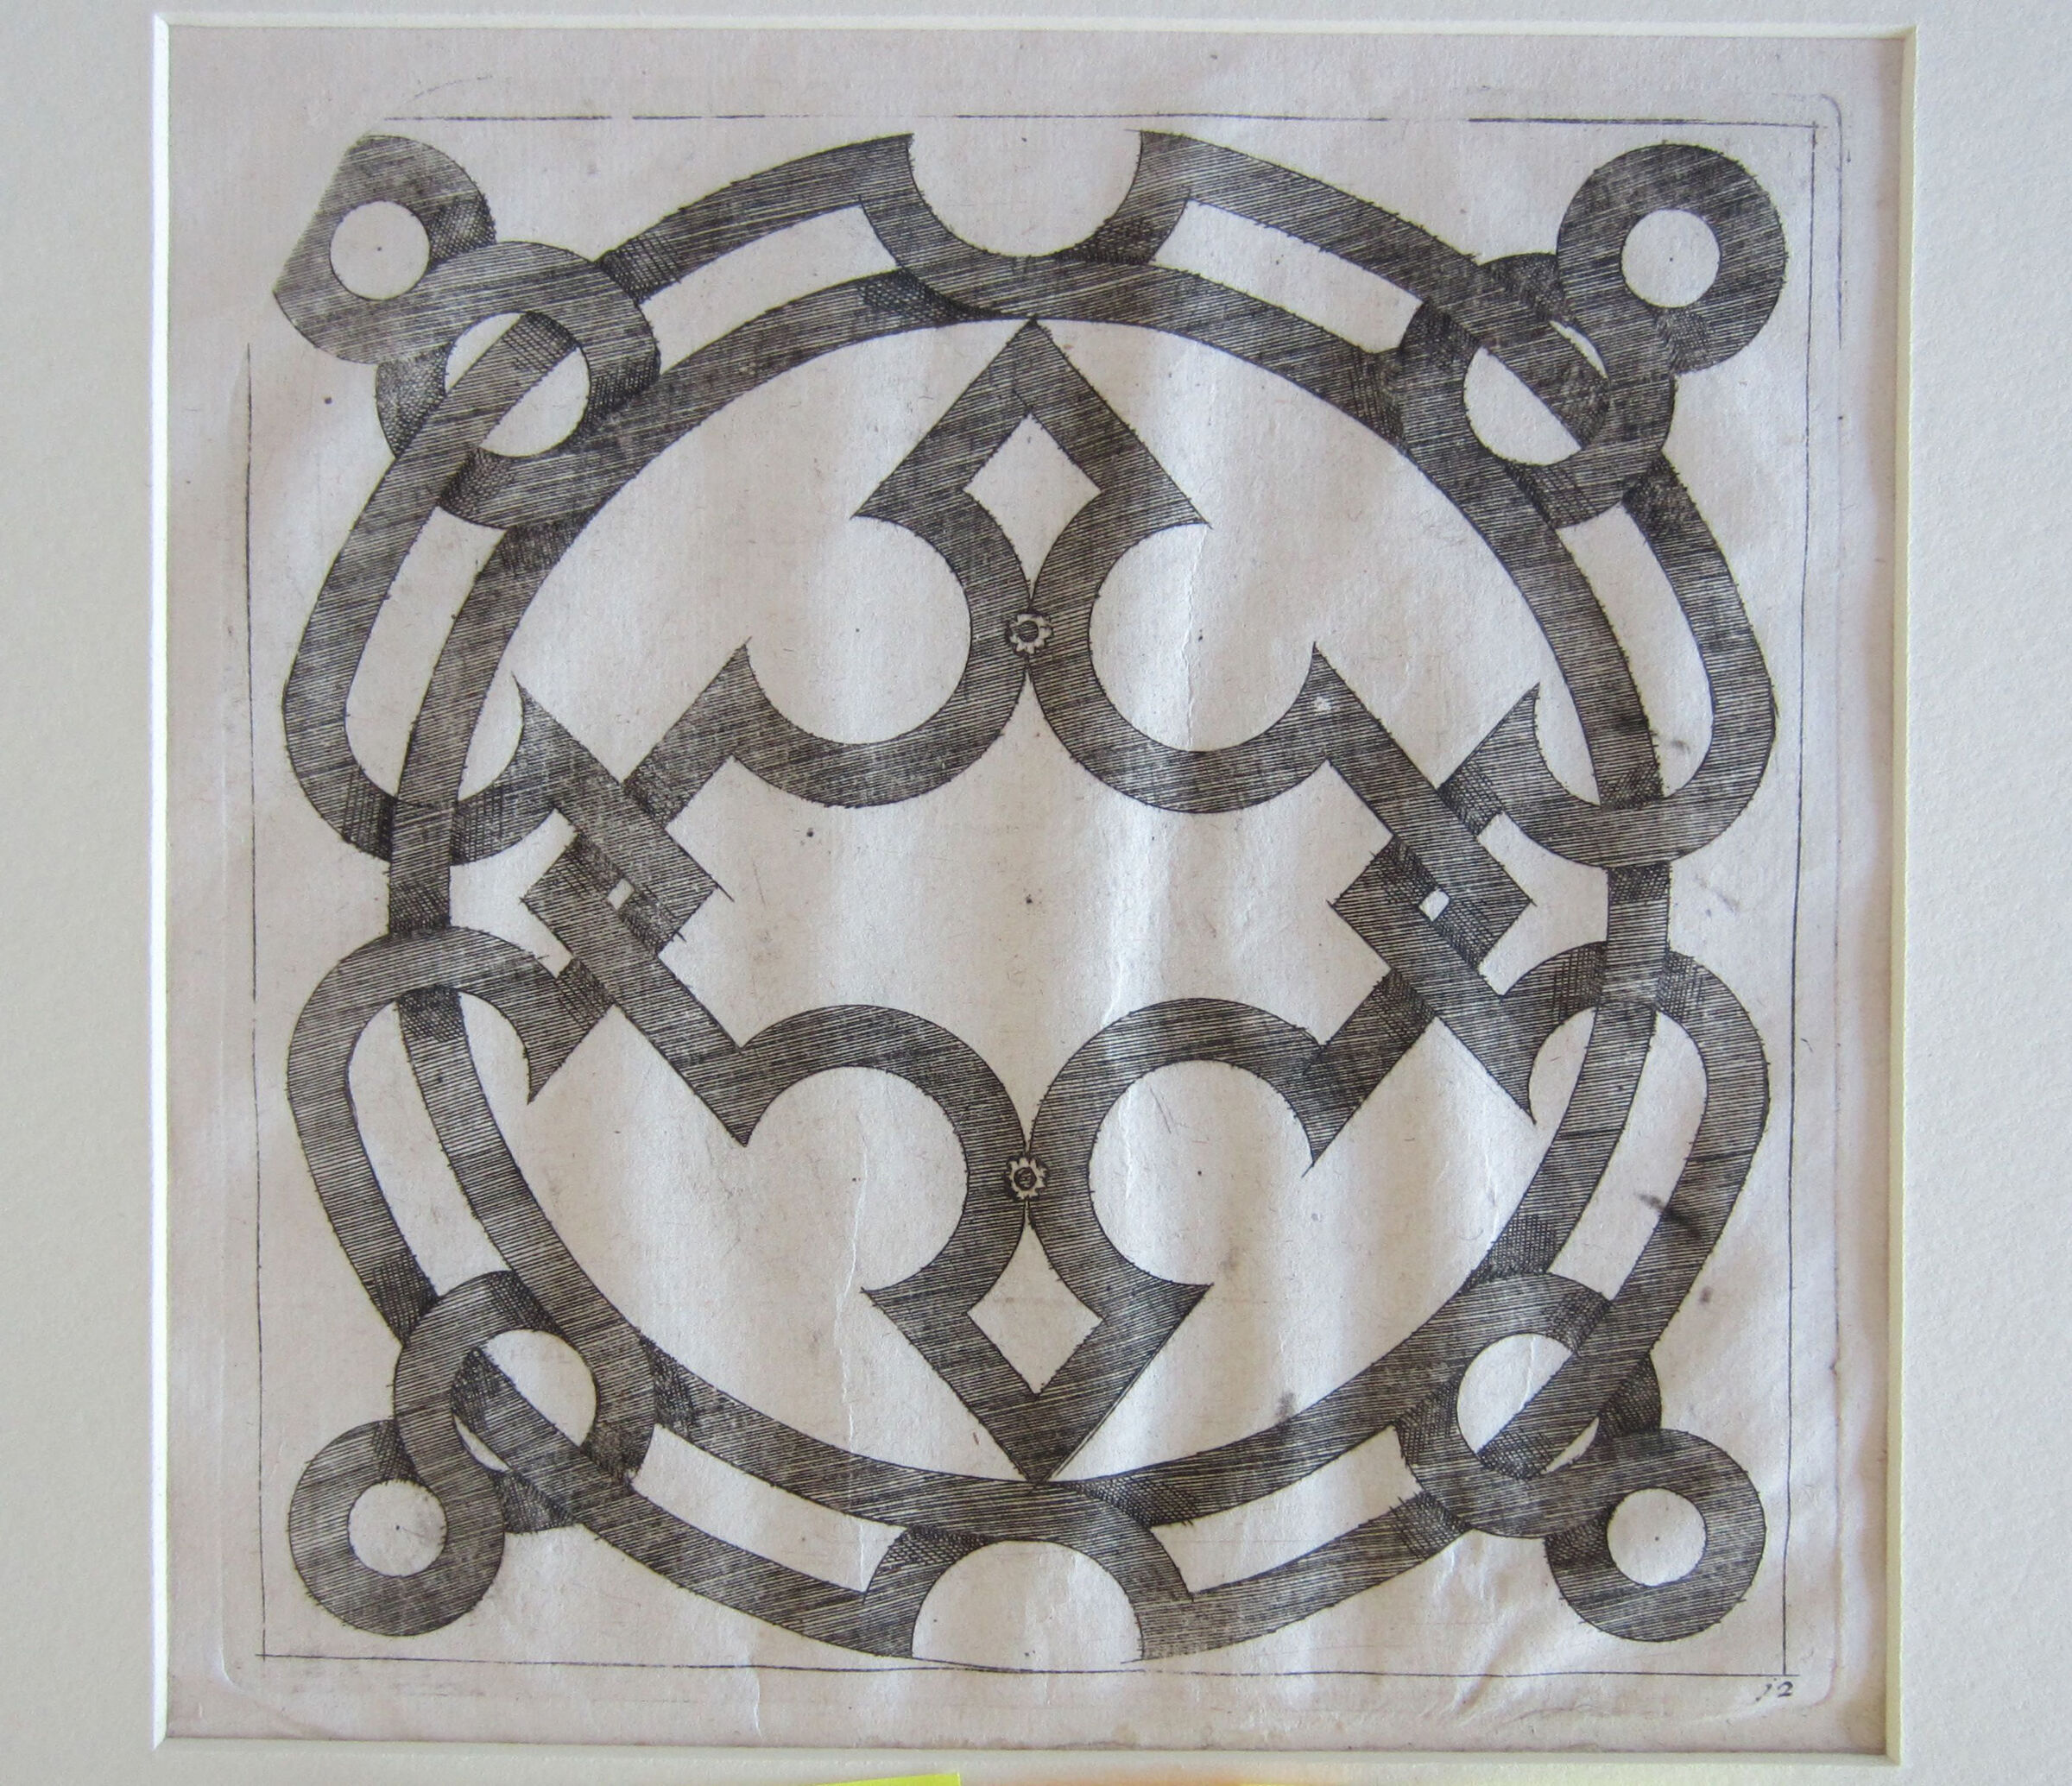 Interlace Centered By A Cross-Shaped Element, Its Upper And Lower Arms Centered By Small Rosettes